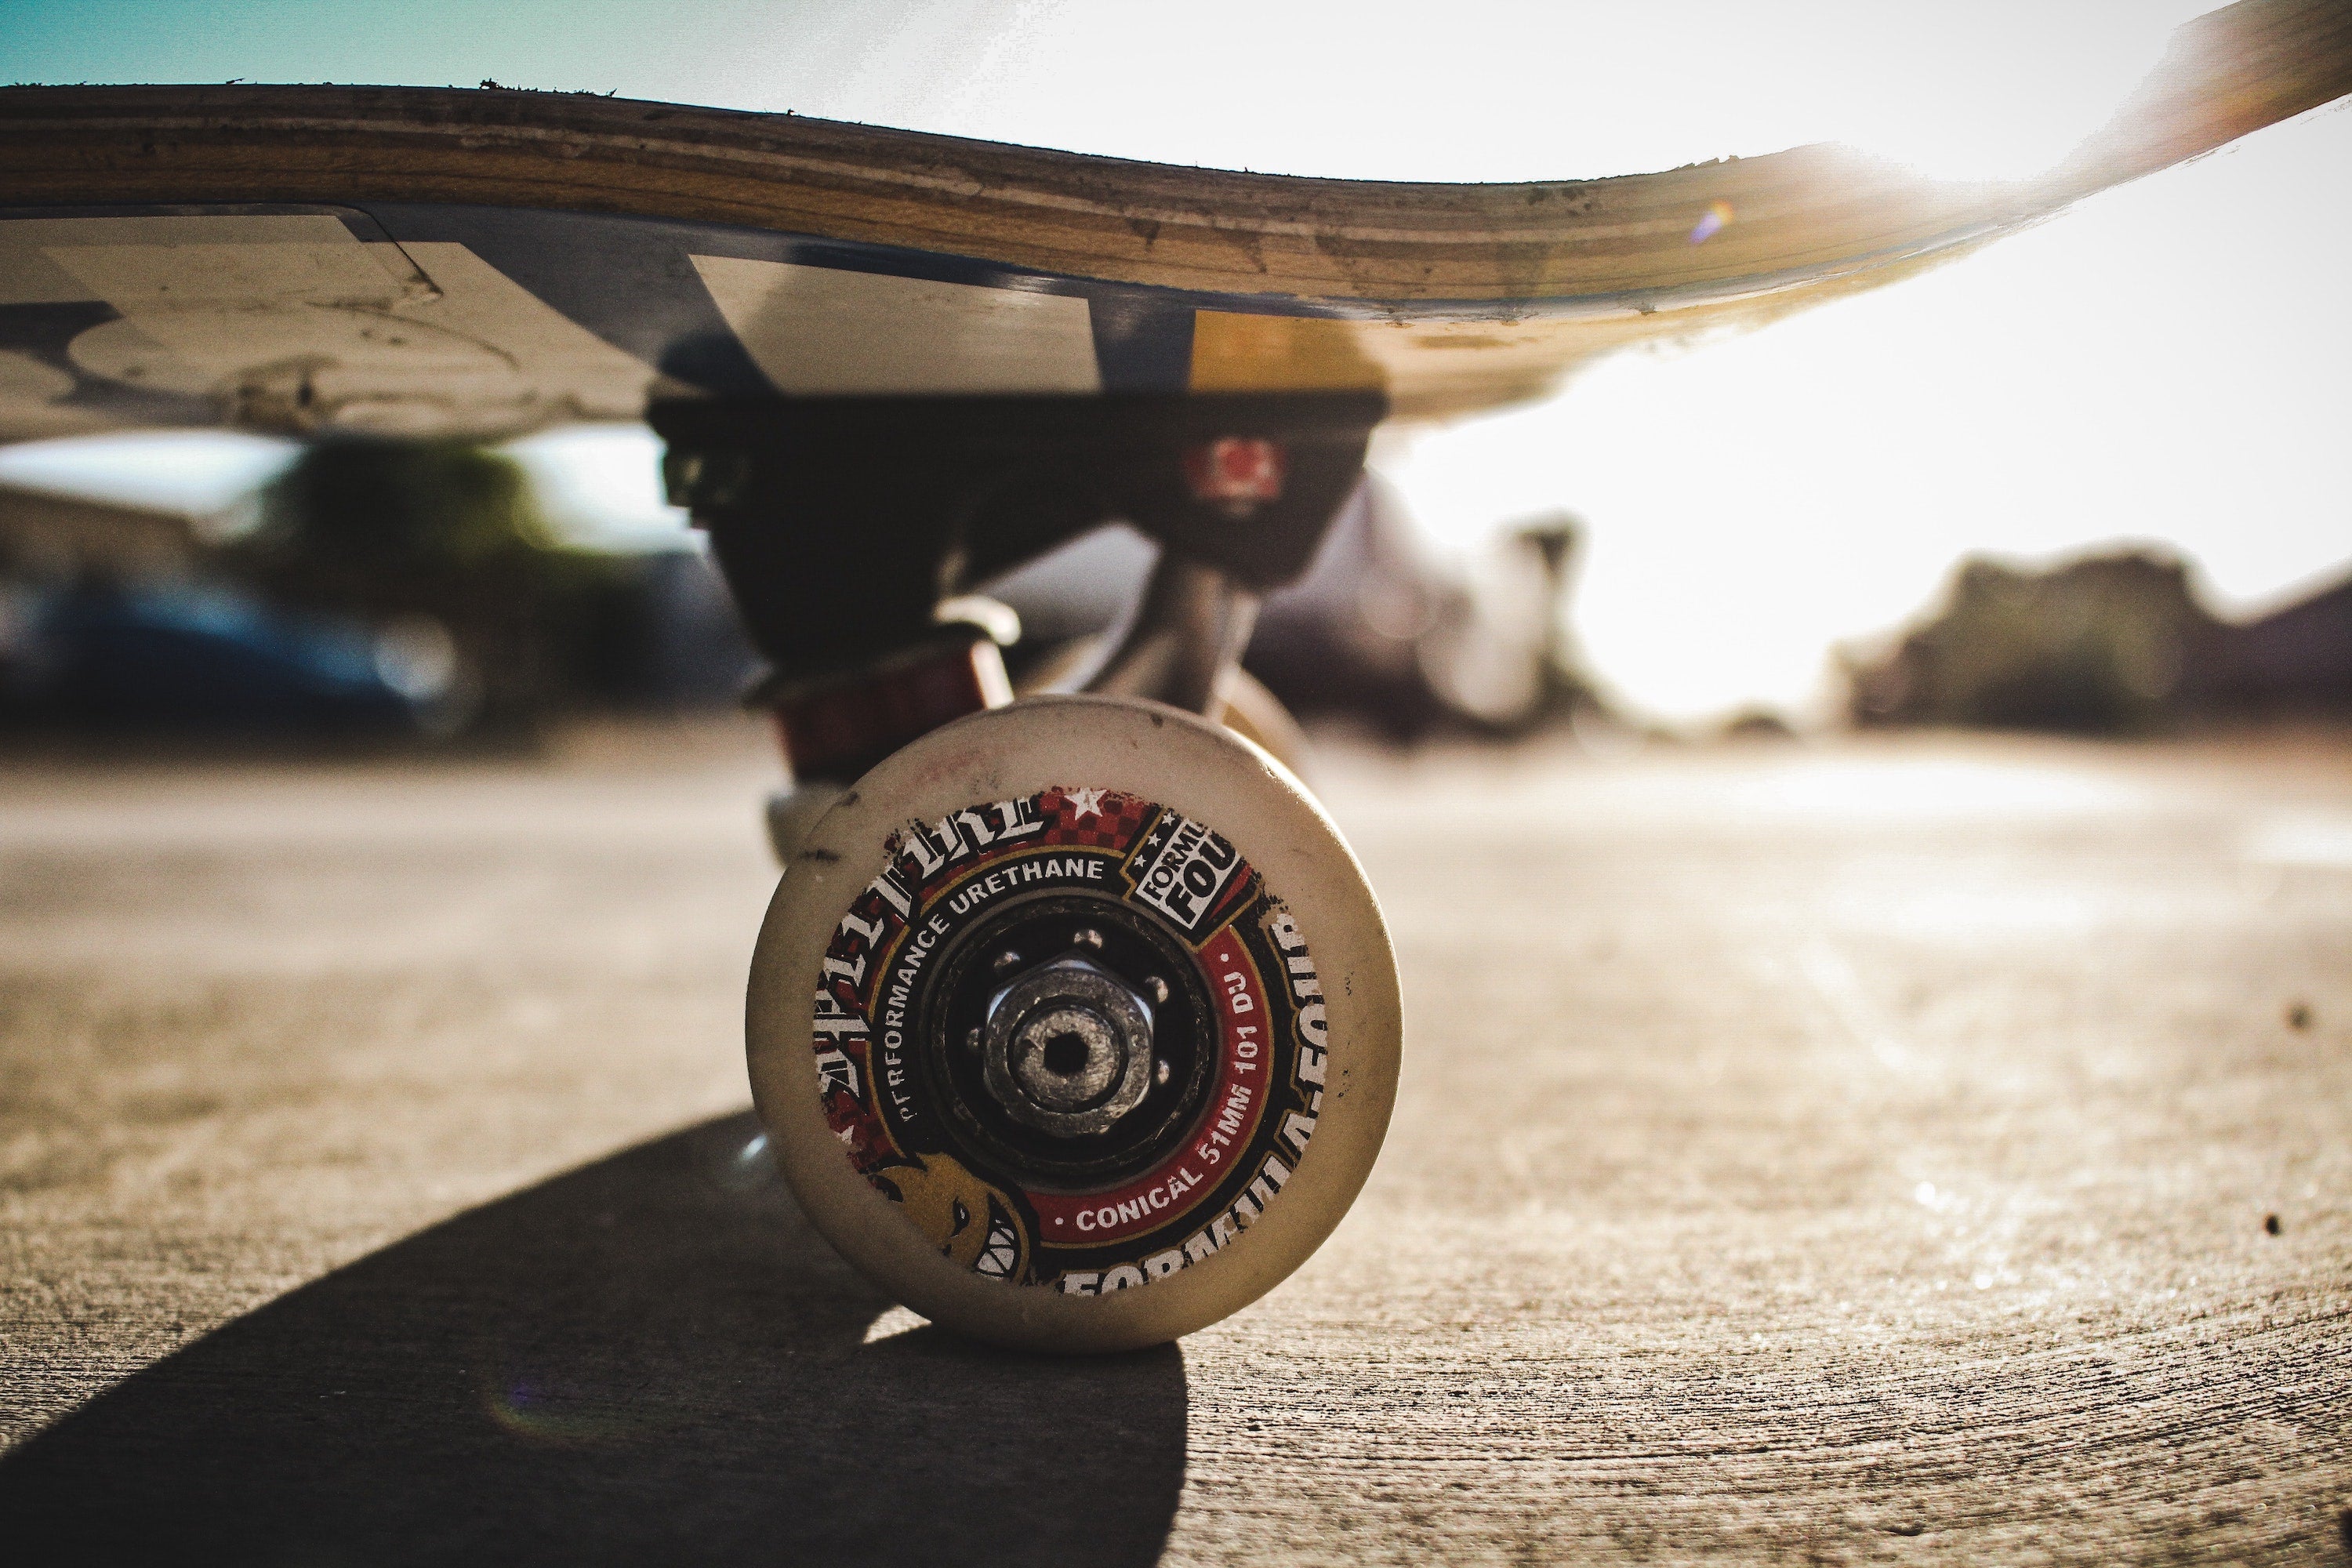 5 Tips For Adding Stickers To Your Skateboard